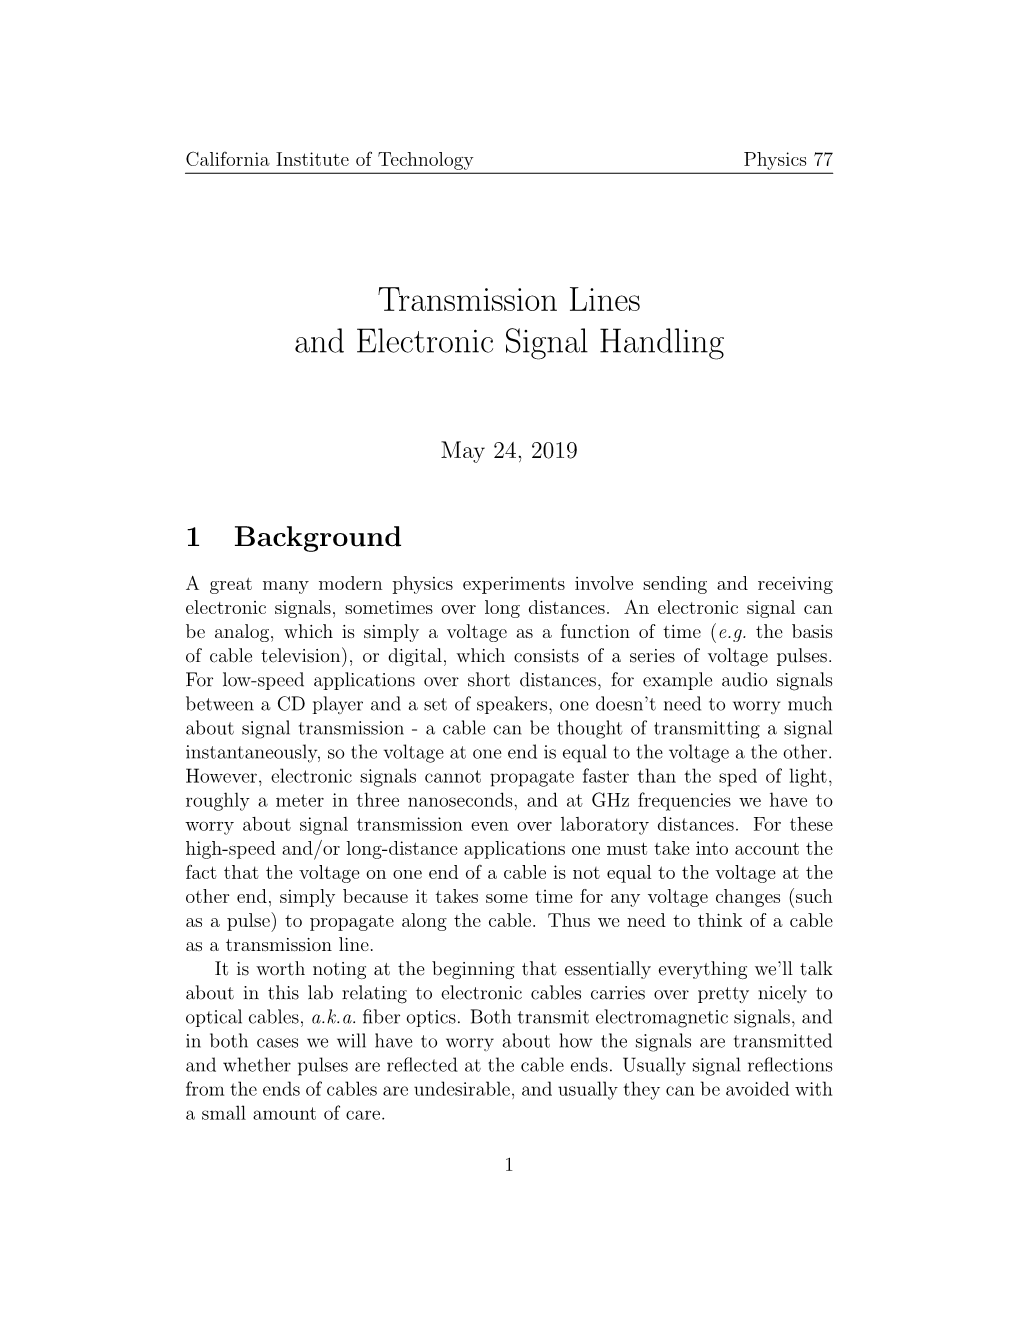 Transmission Lines and Electronic Signal Handling